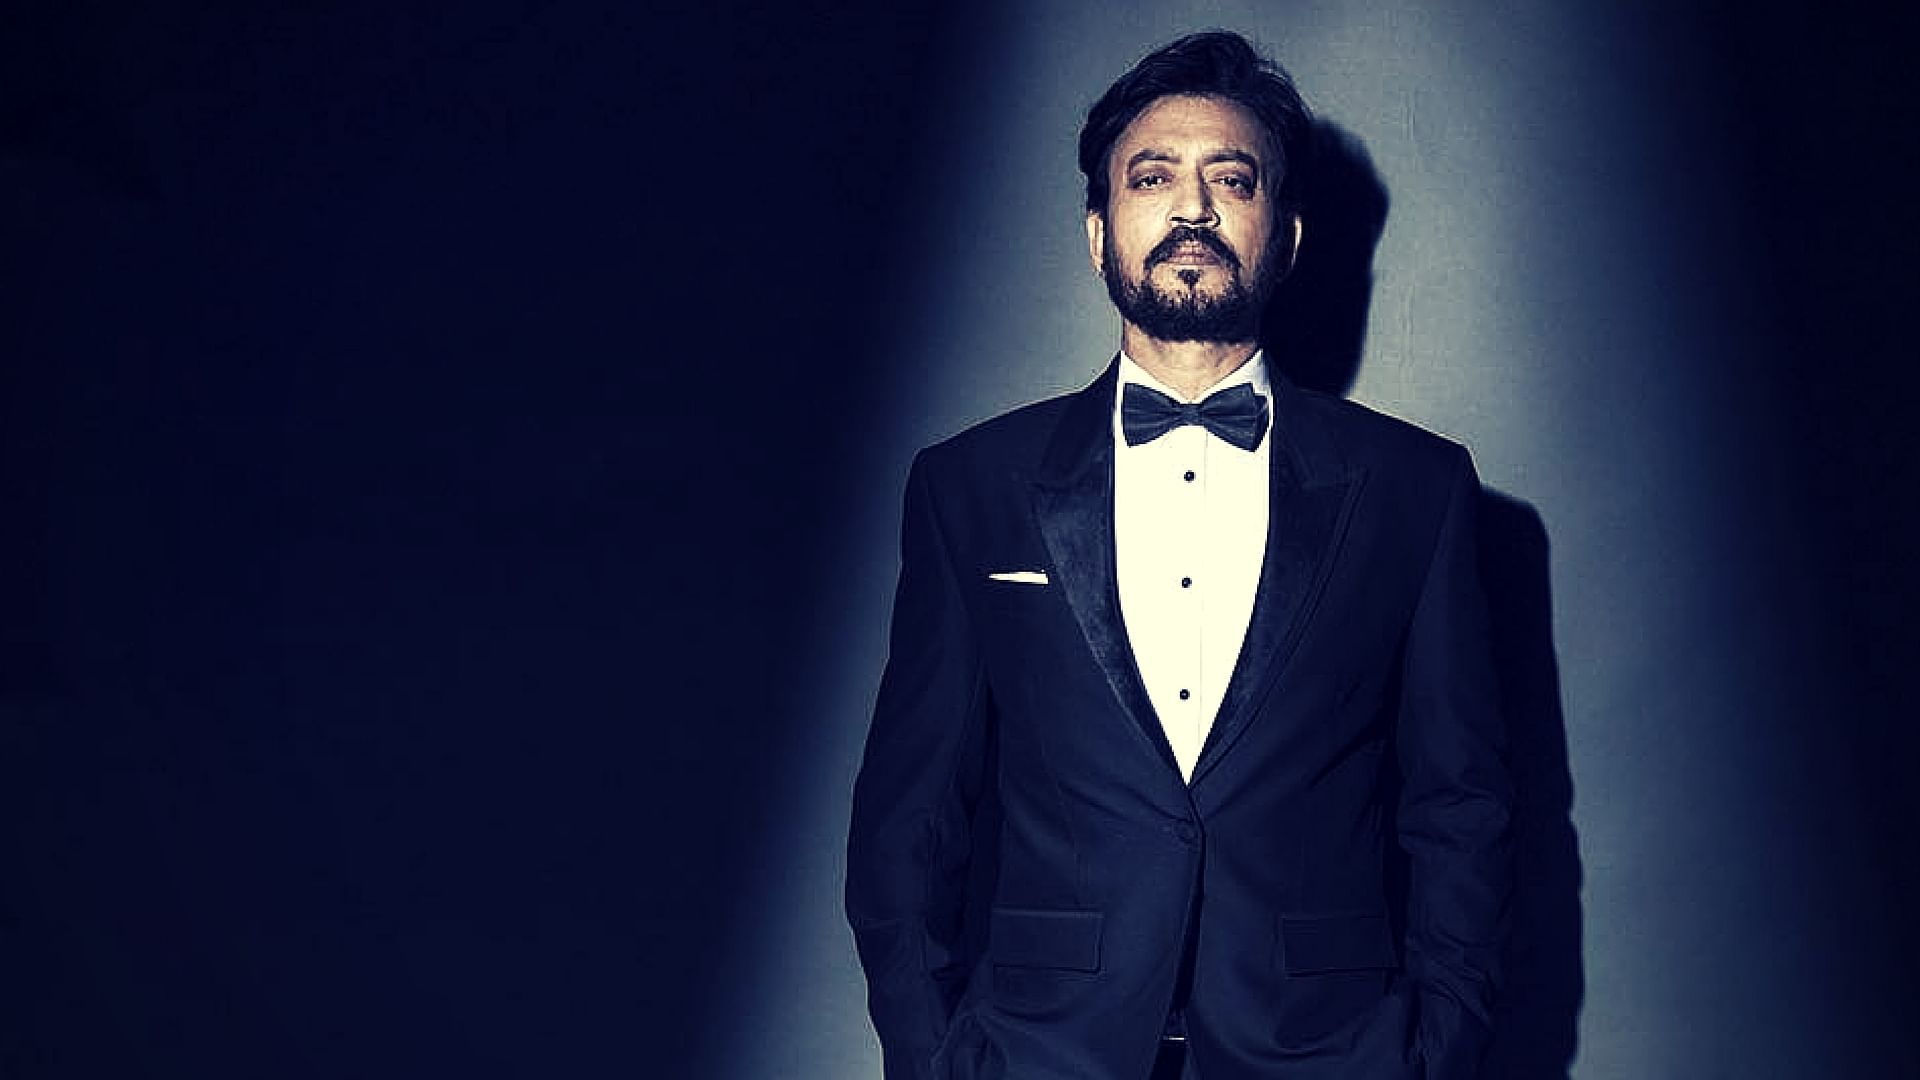 Irrfan Khan was presented the Icon Award at the London Indian Film Festival.